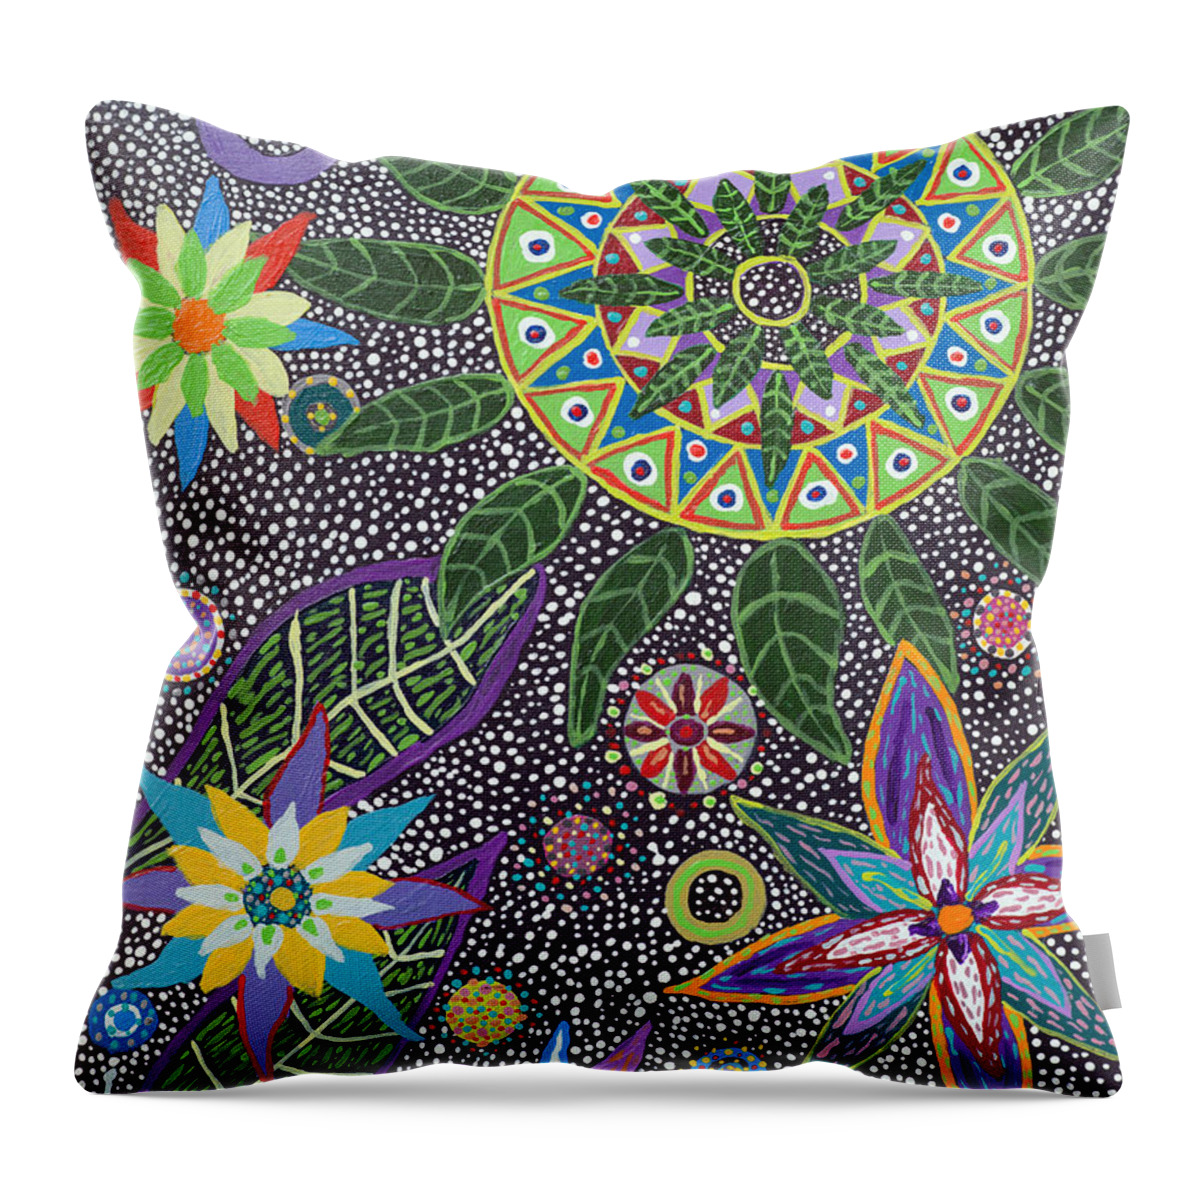 Ayahuasca Throw Pillow featuring the painting Ayahuasca Vision #4 by Howard Charing